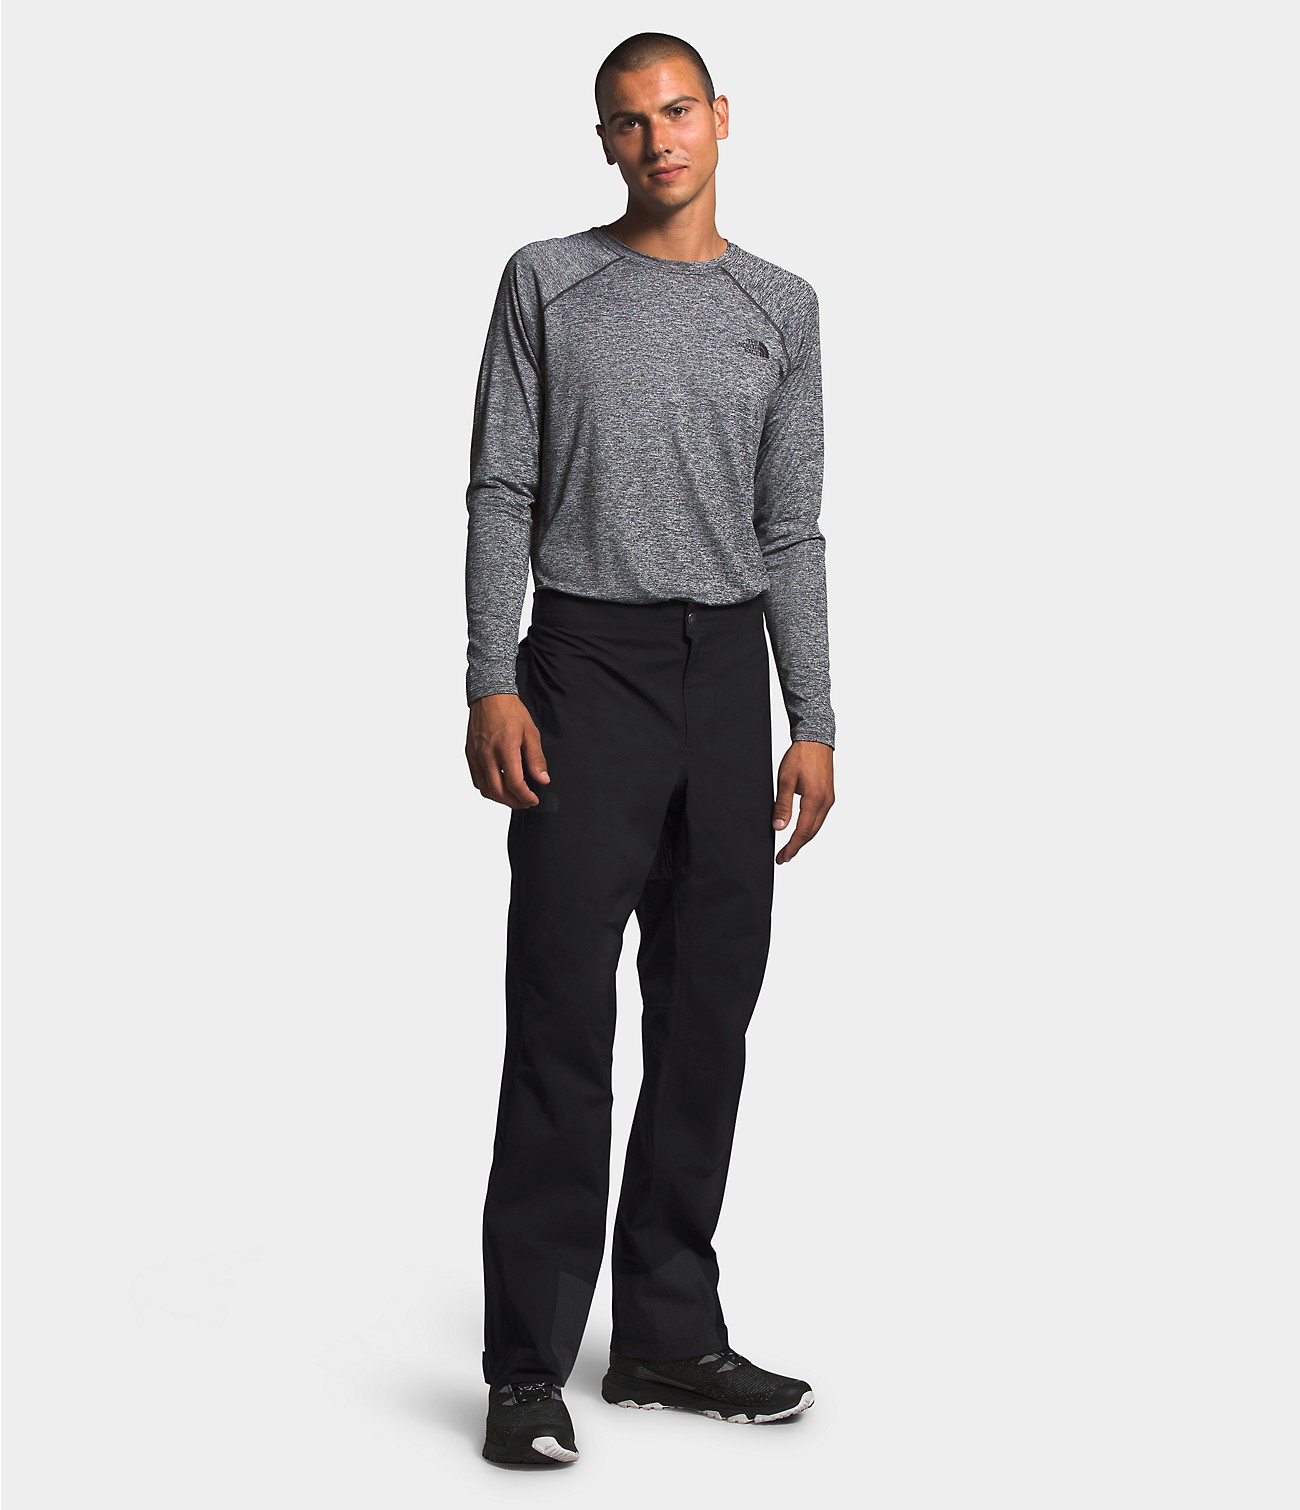 Men's Movmynt Pant | The North Face